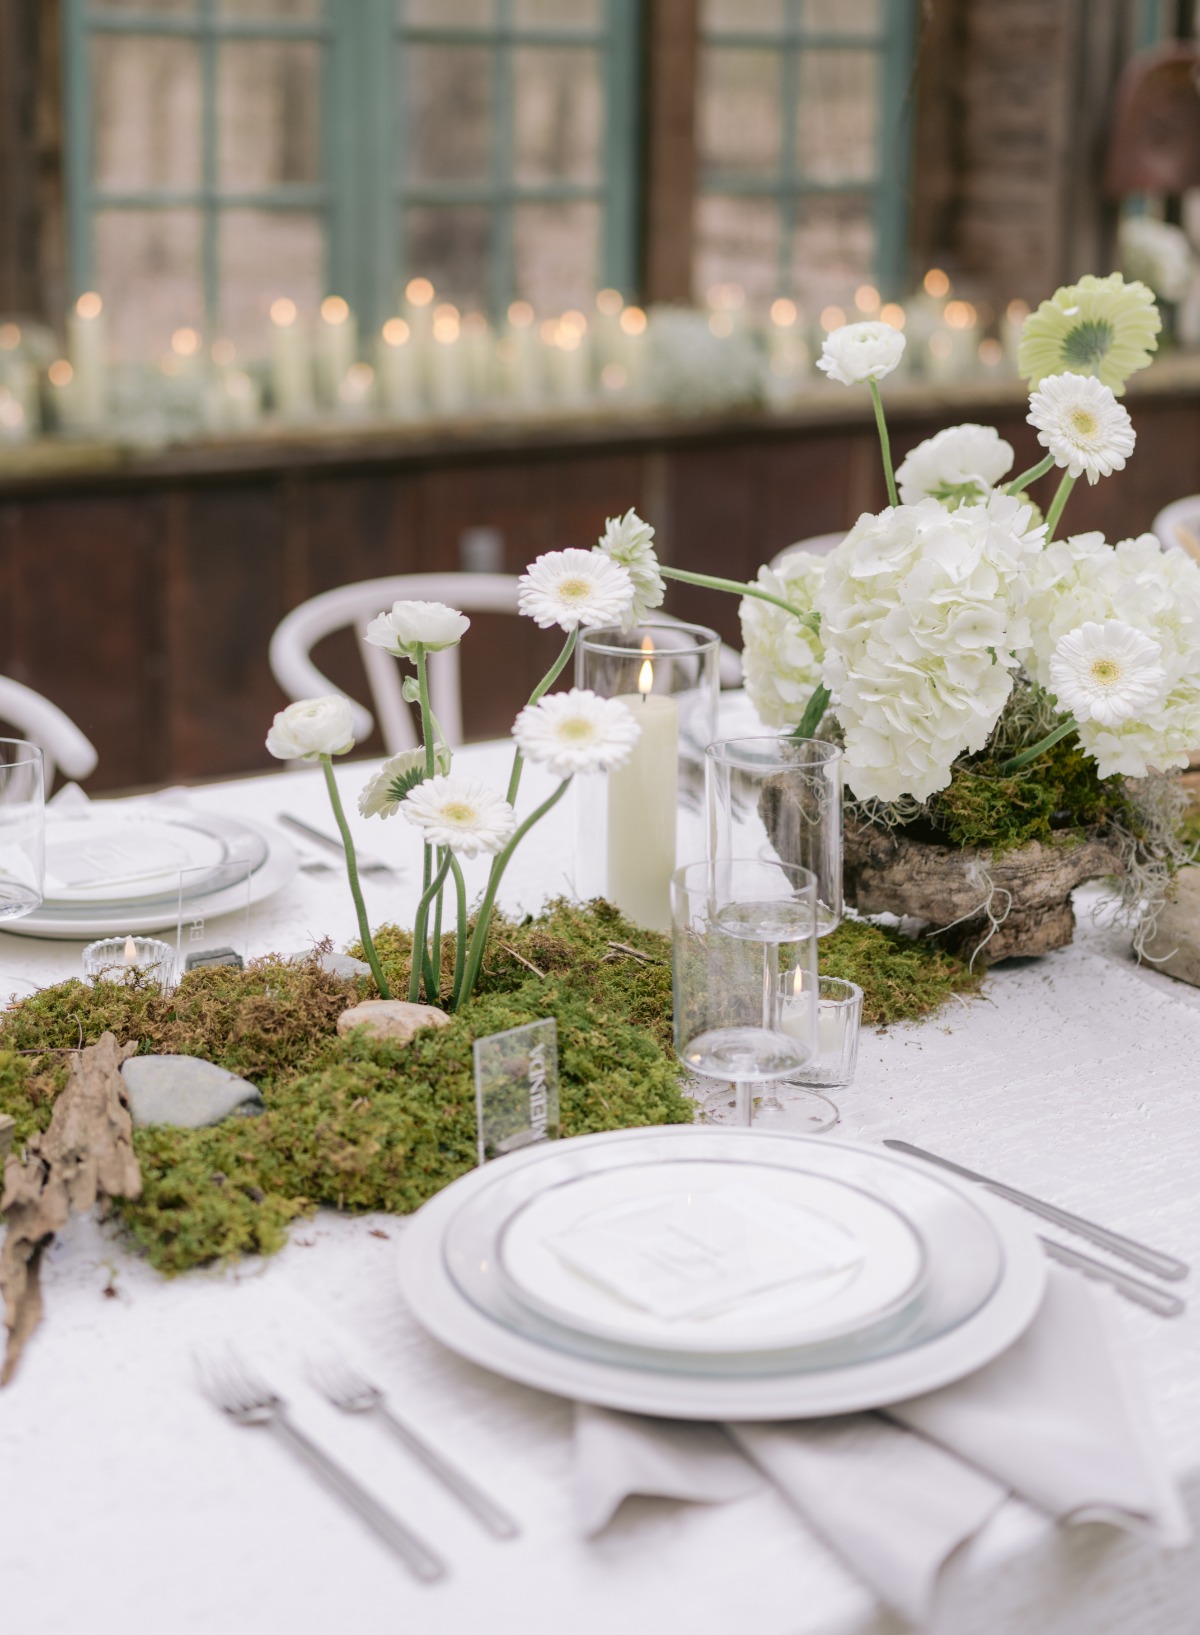 Moss and daisy table centerpiece